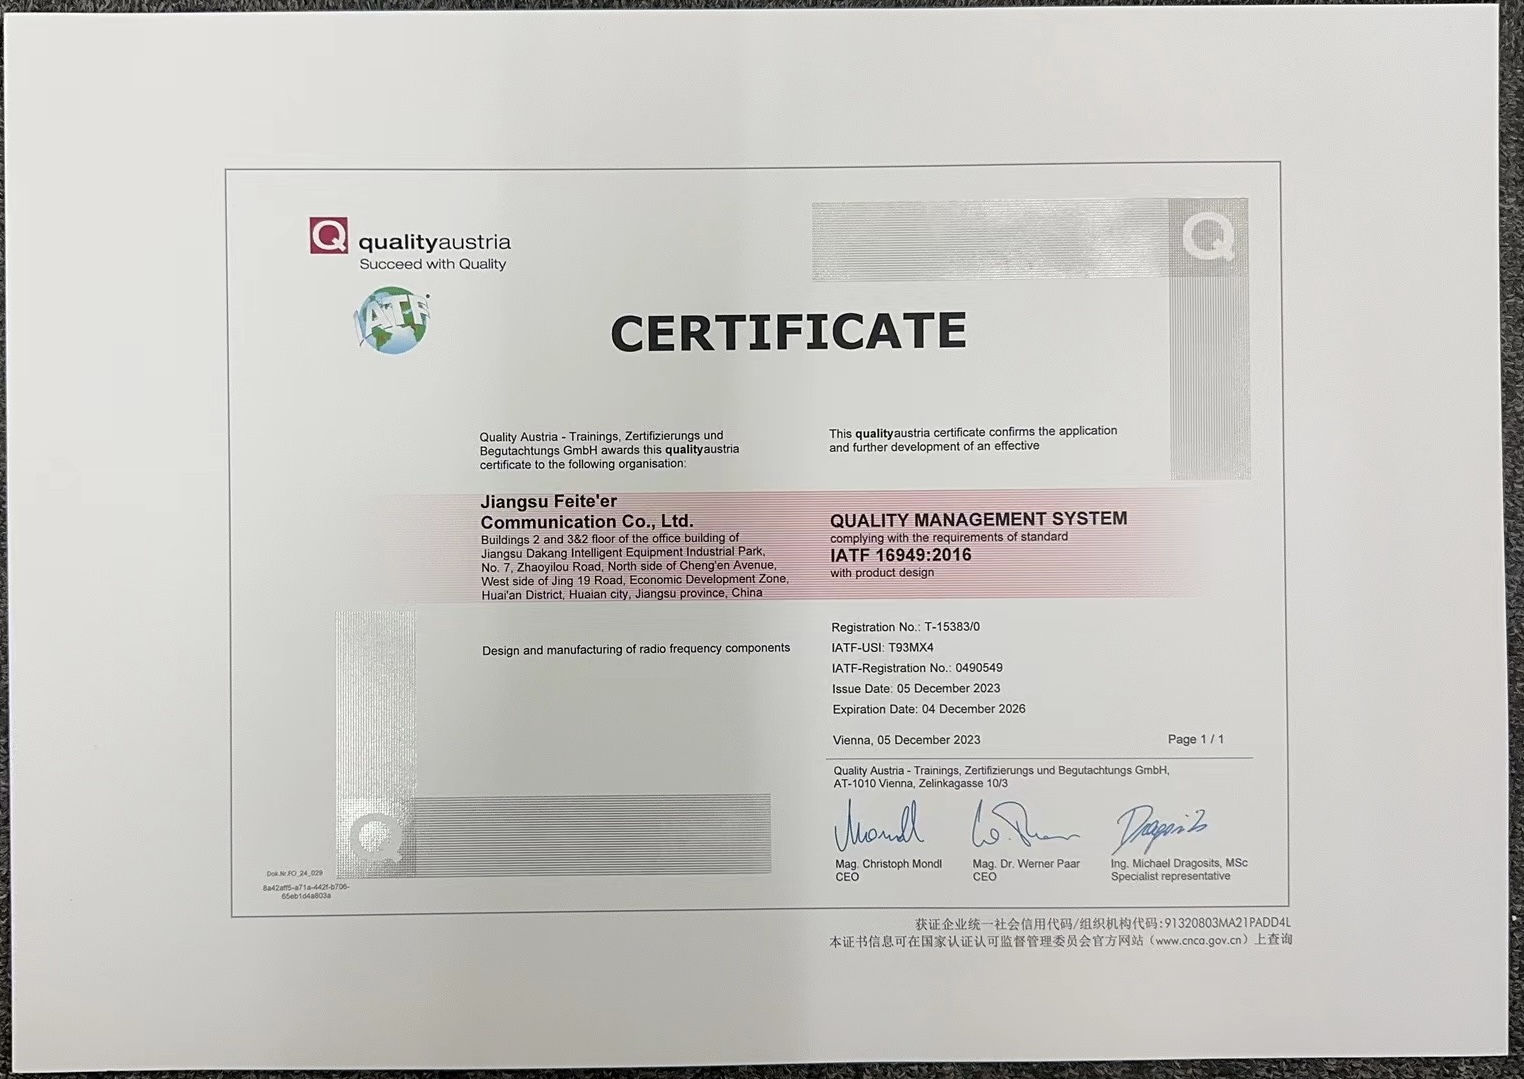 Our company has obtained IATF16949:2016 Quality Management System Certification